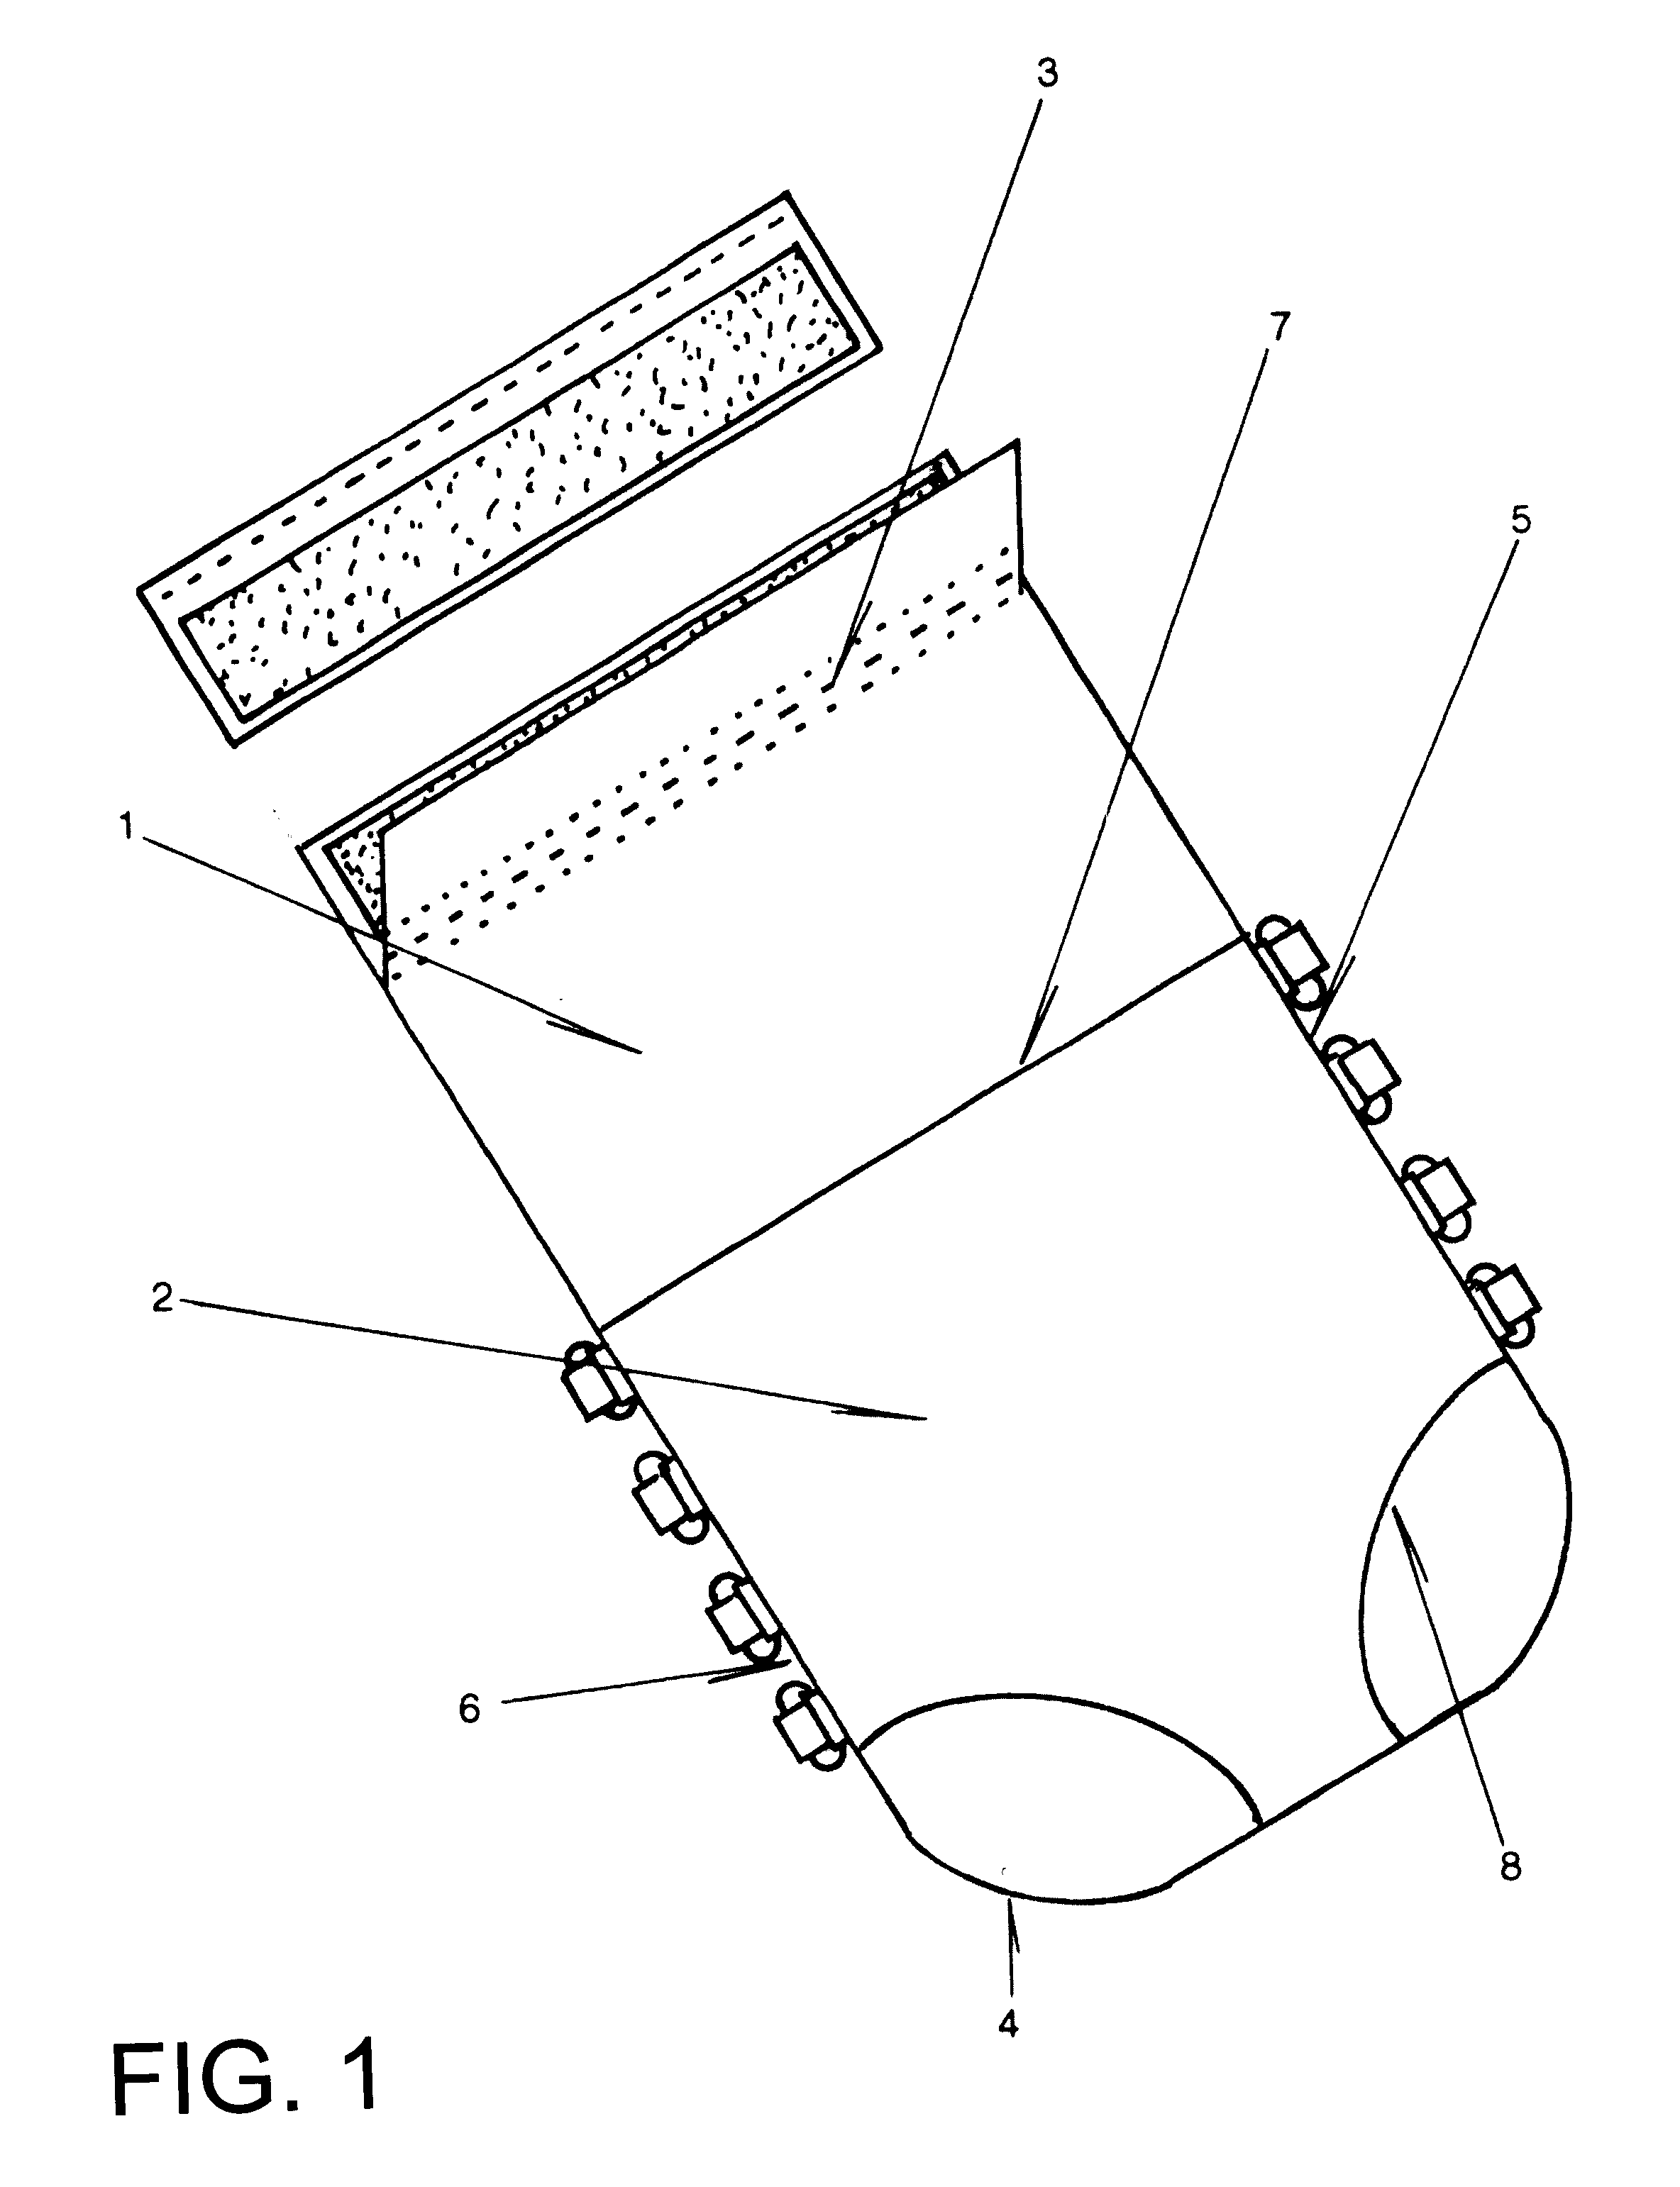 Dismountable and adjustable fastening device for laying down pediatric patients in an inclined position